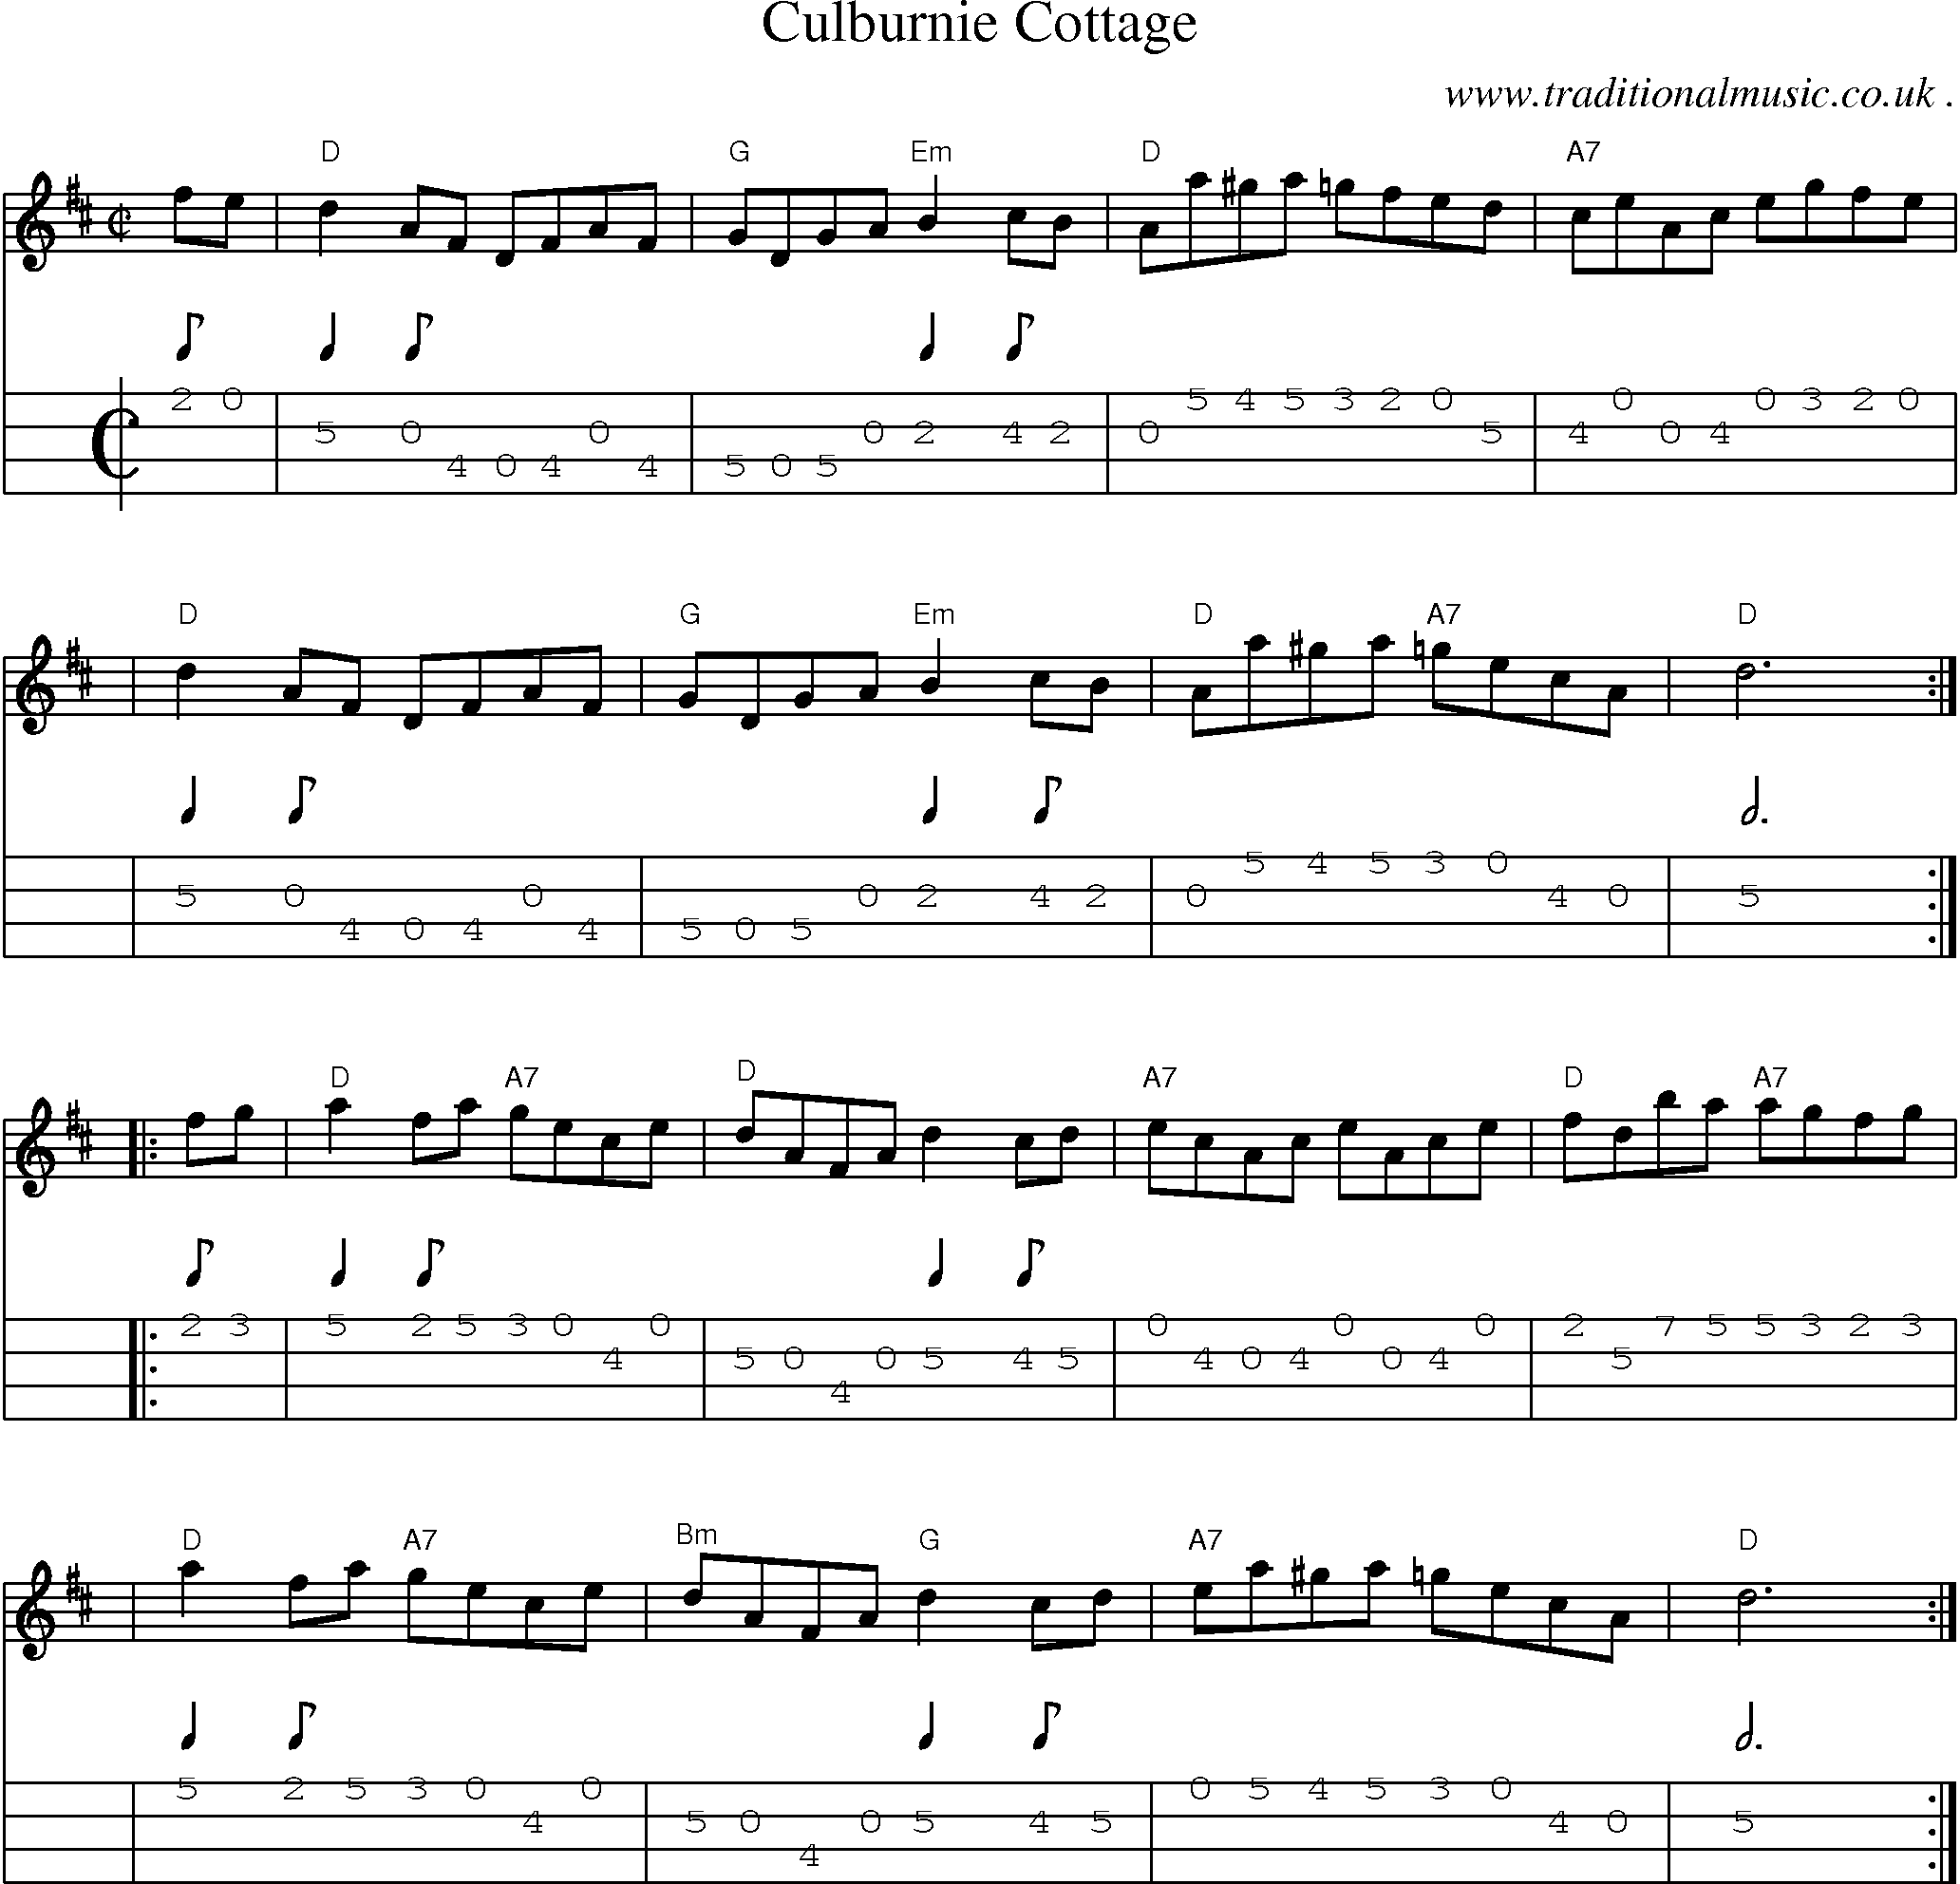 Sheet-music  score, Chords and Mandolin Tabs for Culburnie Cottage